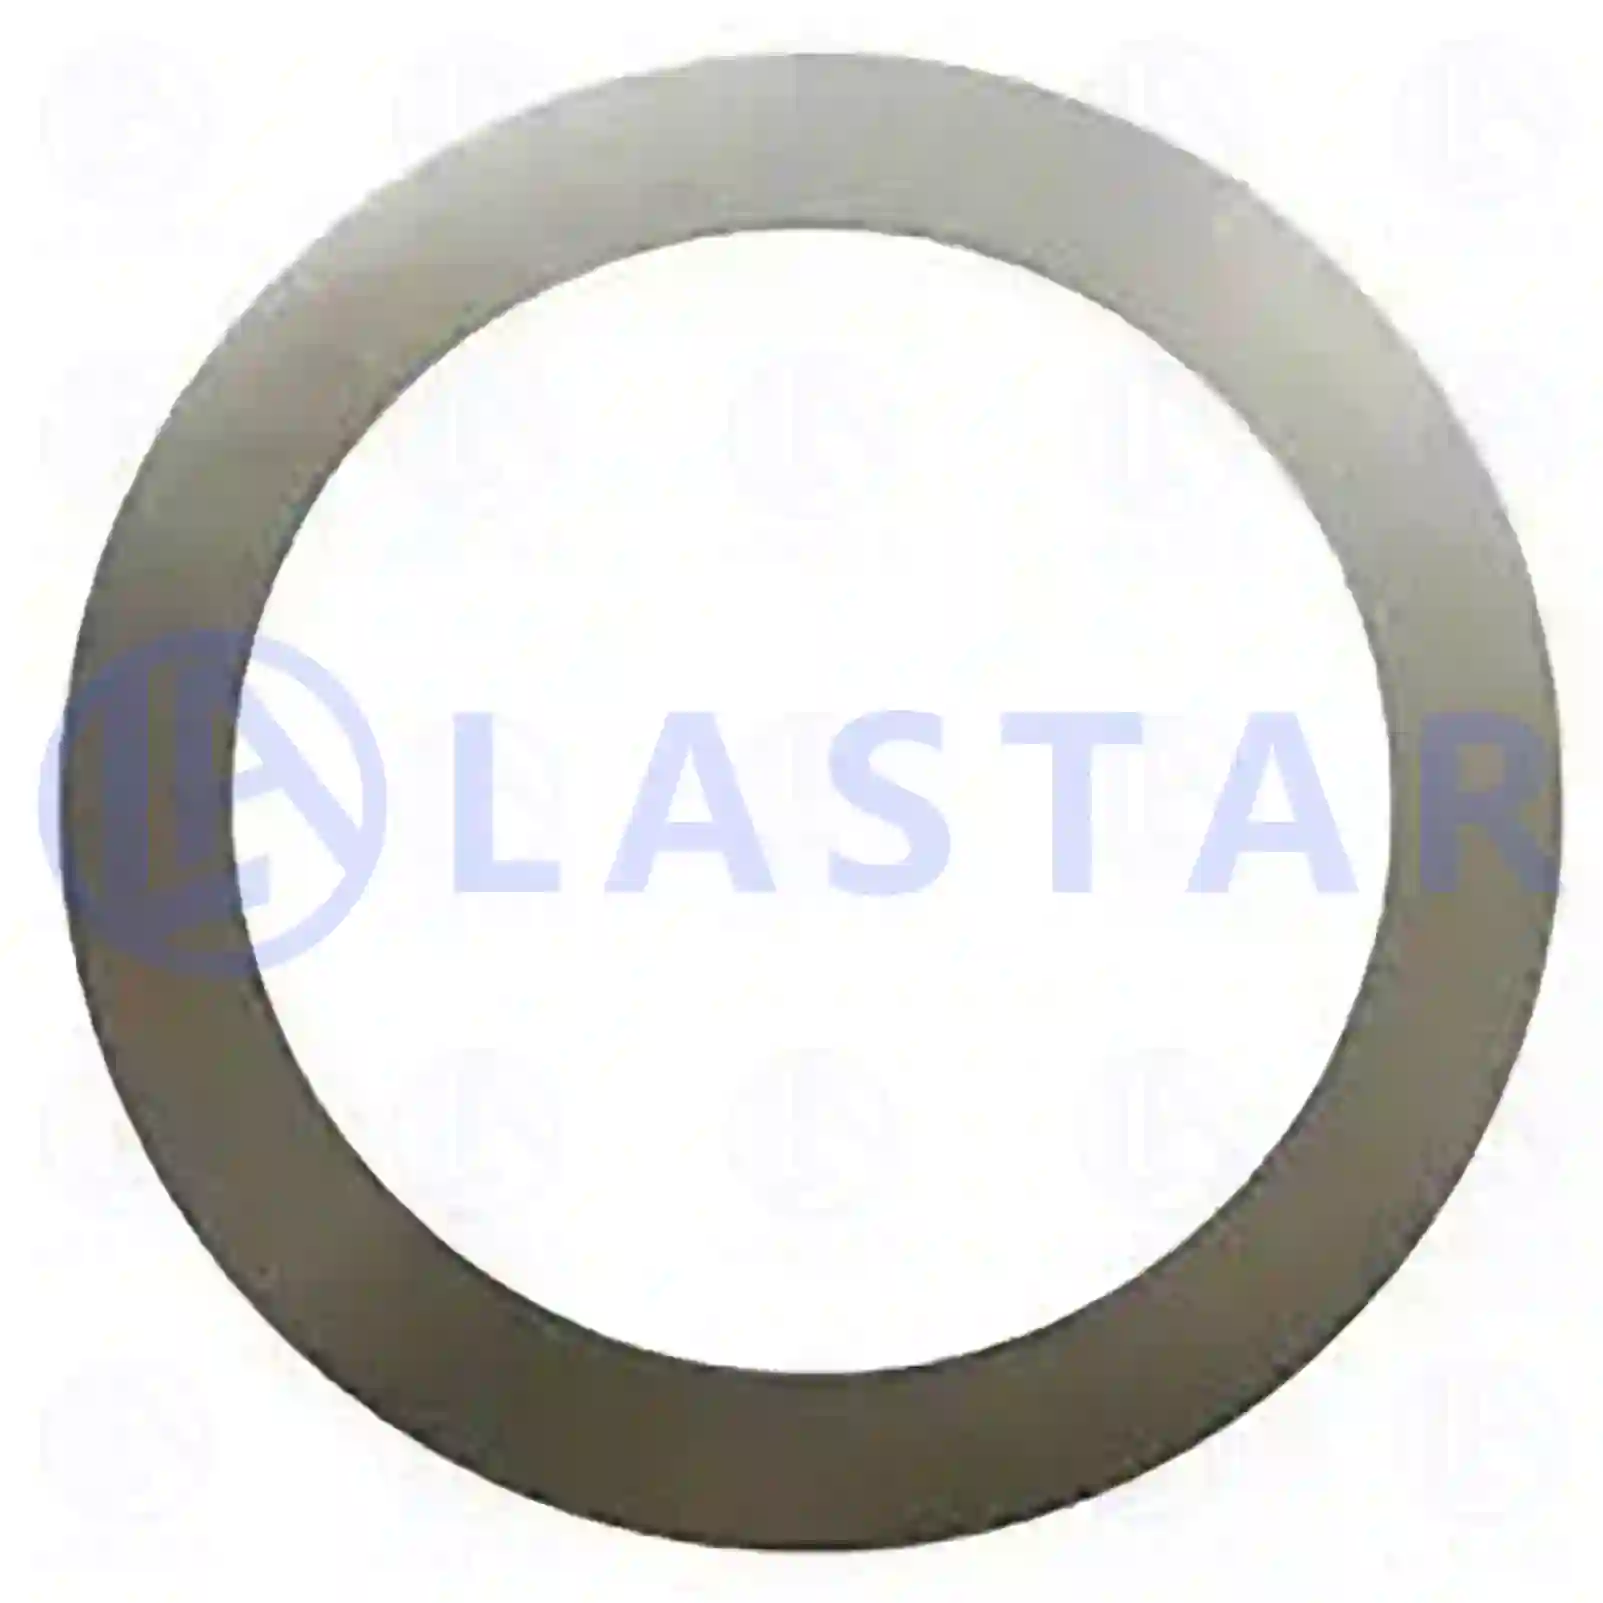 Washer, 77726926, 7403197754, 1115642, 3197754 ||  77726926 Lastar Spare Part | Truck Spare Parts, Auotomotive Spare Parts Washer, 77726926, 7403197754, 1115642, 3197754 ||  77726926 Lastar Spare Part | Truck Spare Parts, Auotomotive Spare Parts